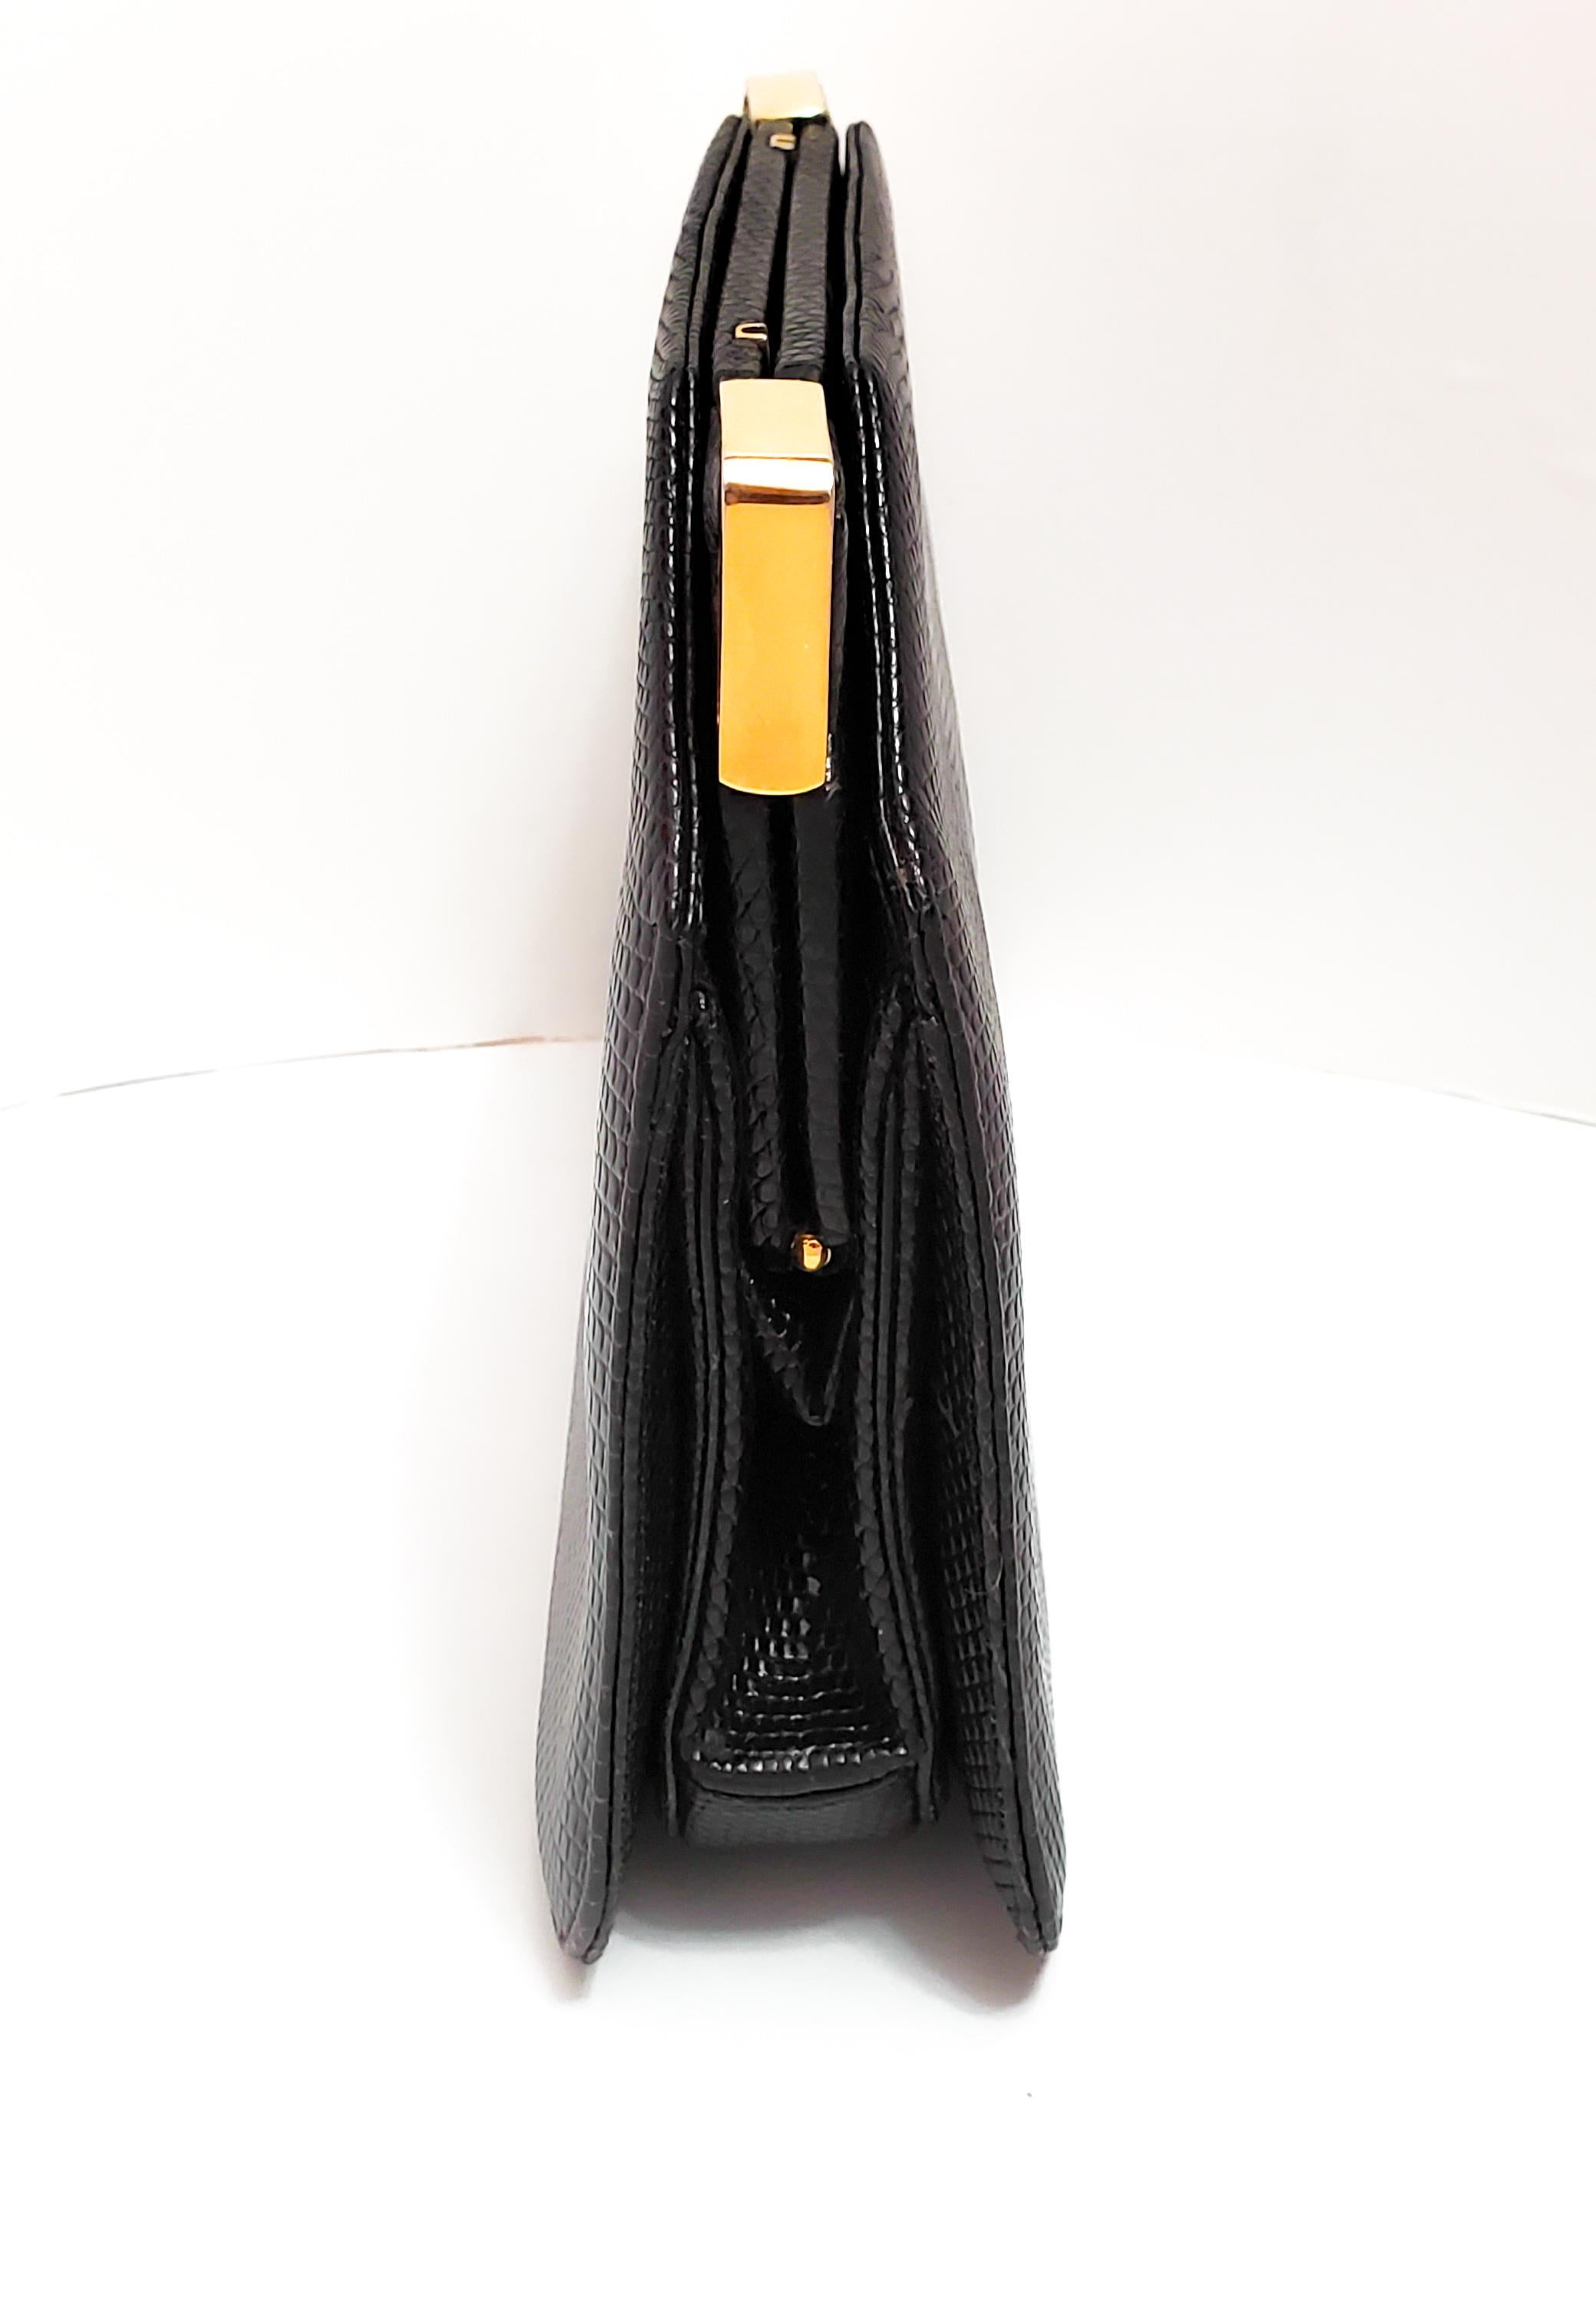 Judith Leiber is known world wide for her collectable handbags!  This fabulous example in black lizard features two art deco corner clasps with gold tone hardware.  Inside find a round mirror, a slash pocket and a zipper compartment with tiny purse